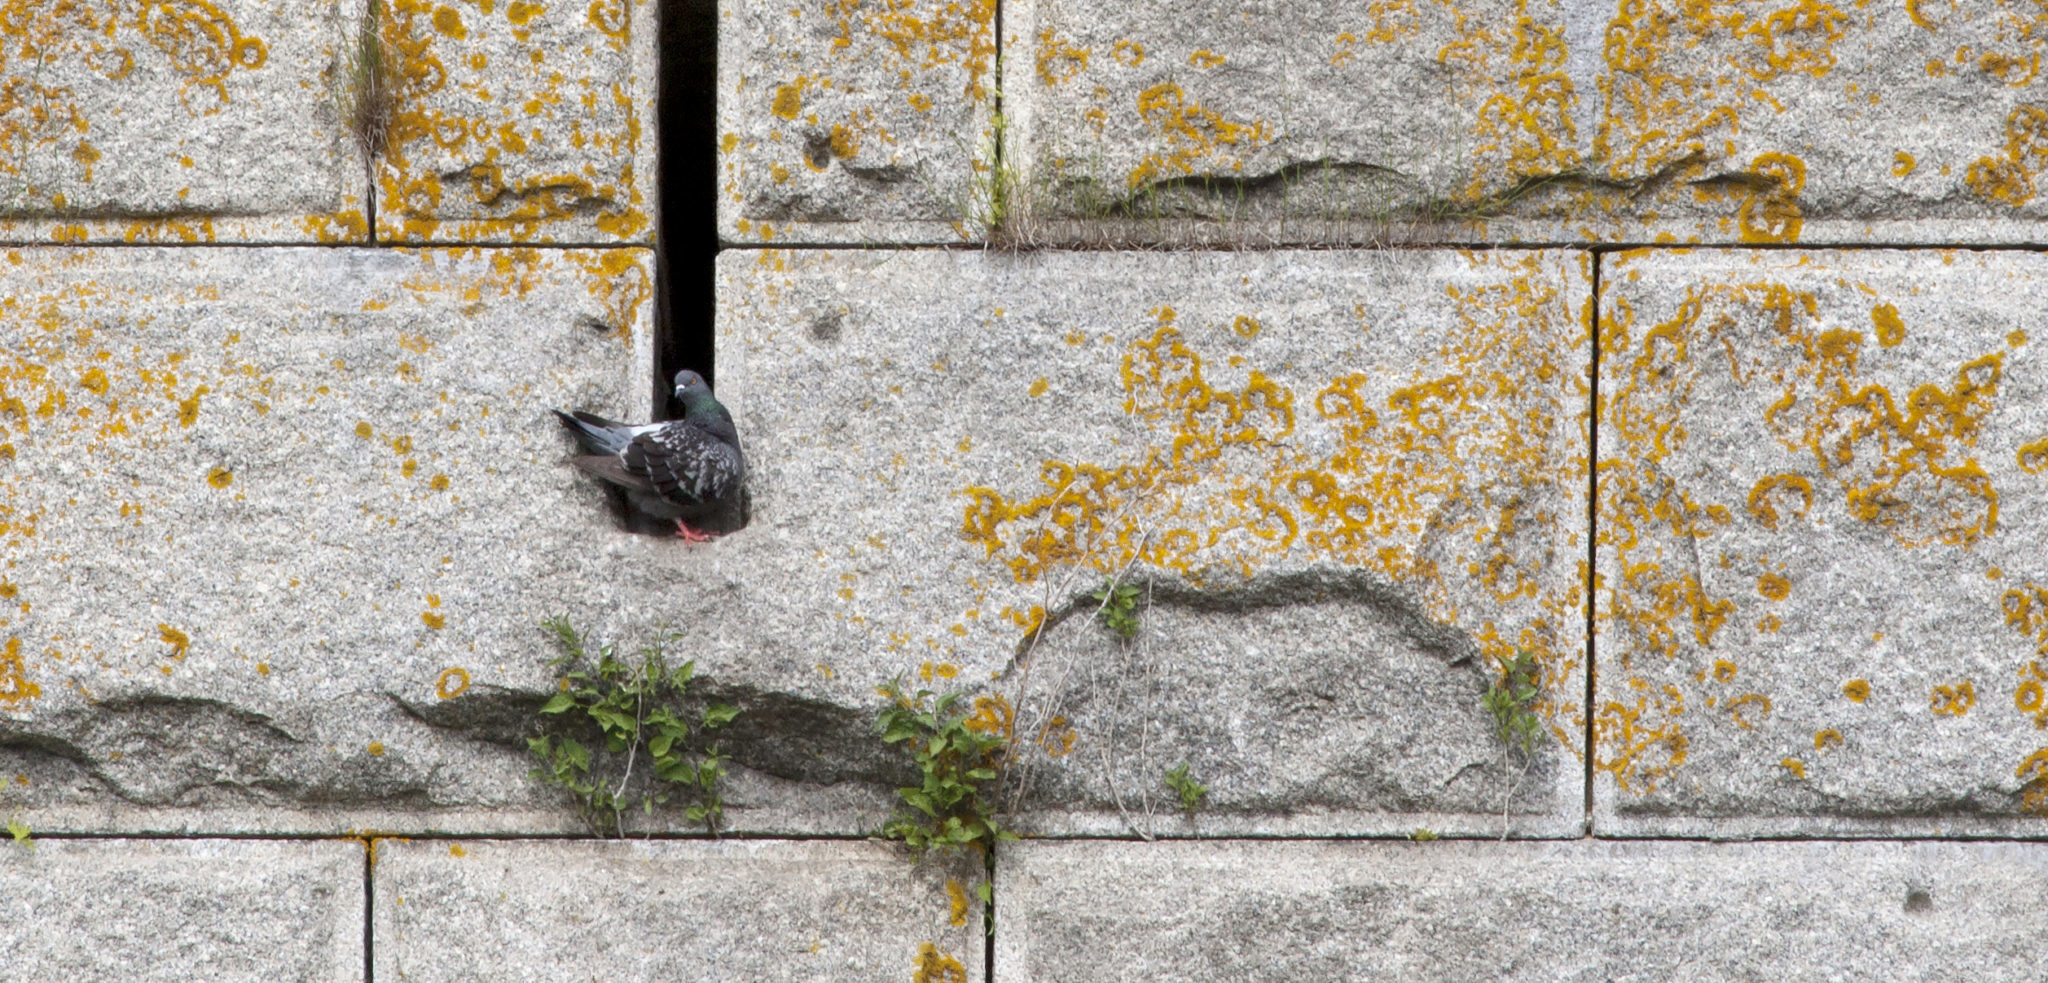 A block wall with a pigeon hiding in a crack. Photo by Lee Anne White